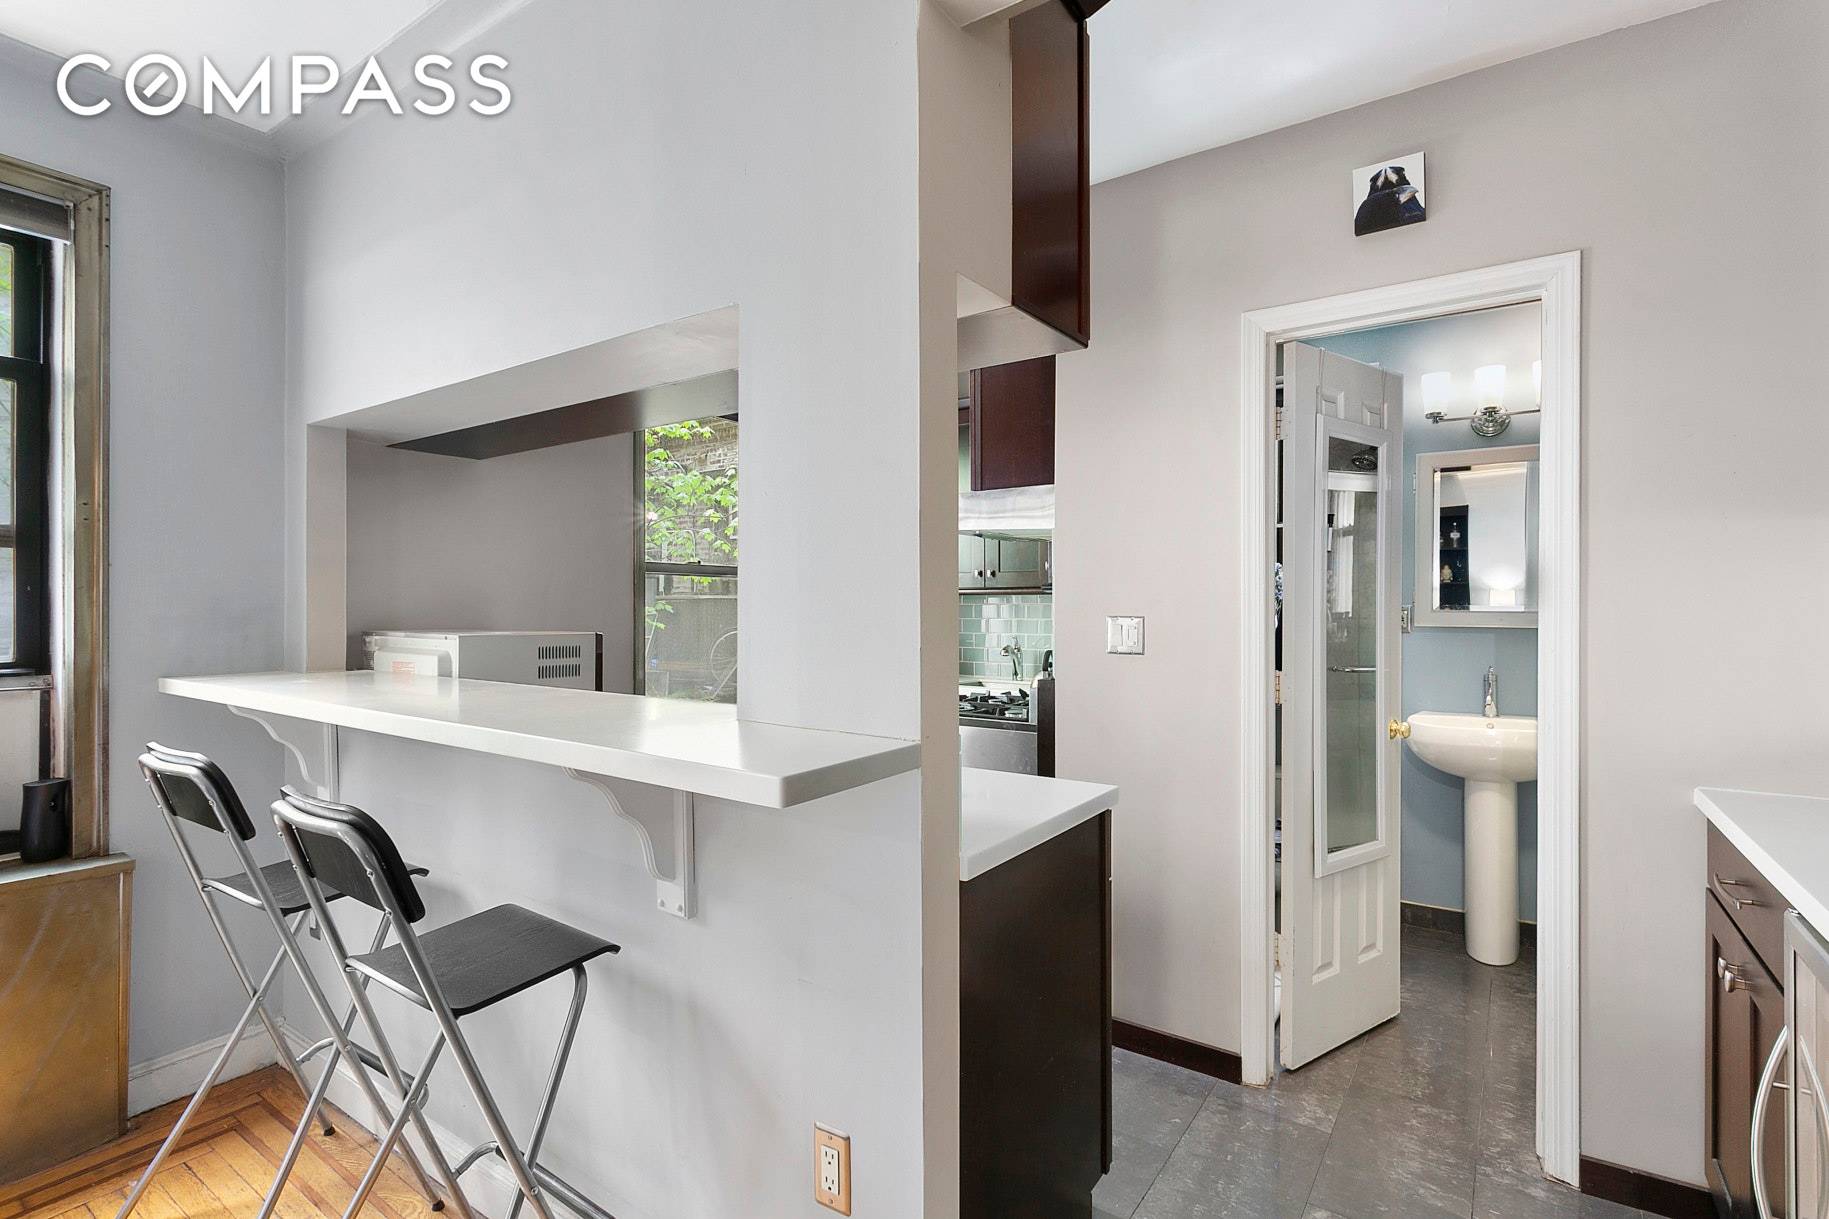 Located in the Chelsea Flatiron neighborhood this large alcove studio with a beautiful modern kitchen, lots of storage space, and low carrying costs make this apartment a great find !